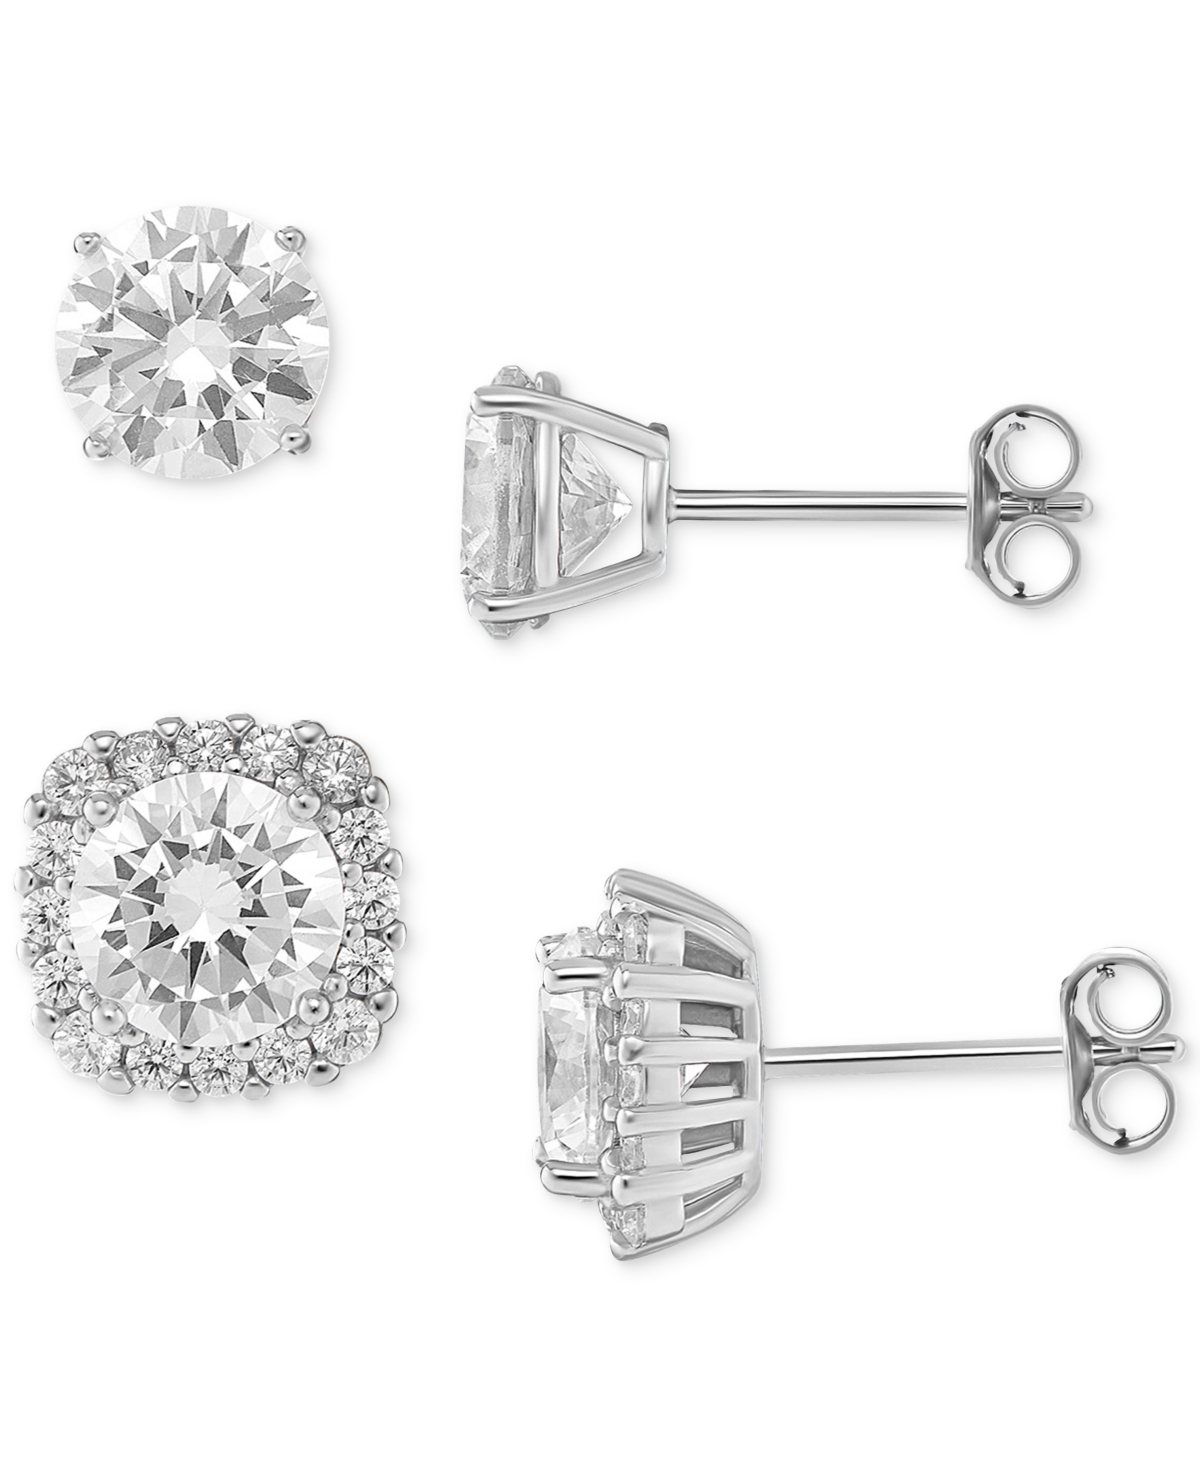 2-Pc. Set Cubic Zirconia Halo & Stud Earrings in Sterling Silver, Created for Macy's - Sterling Silver